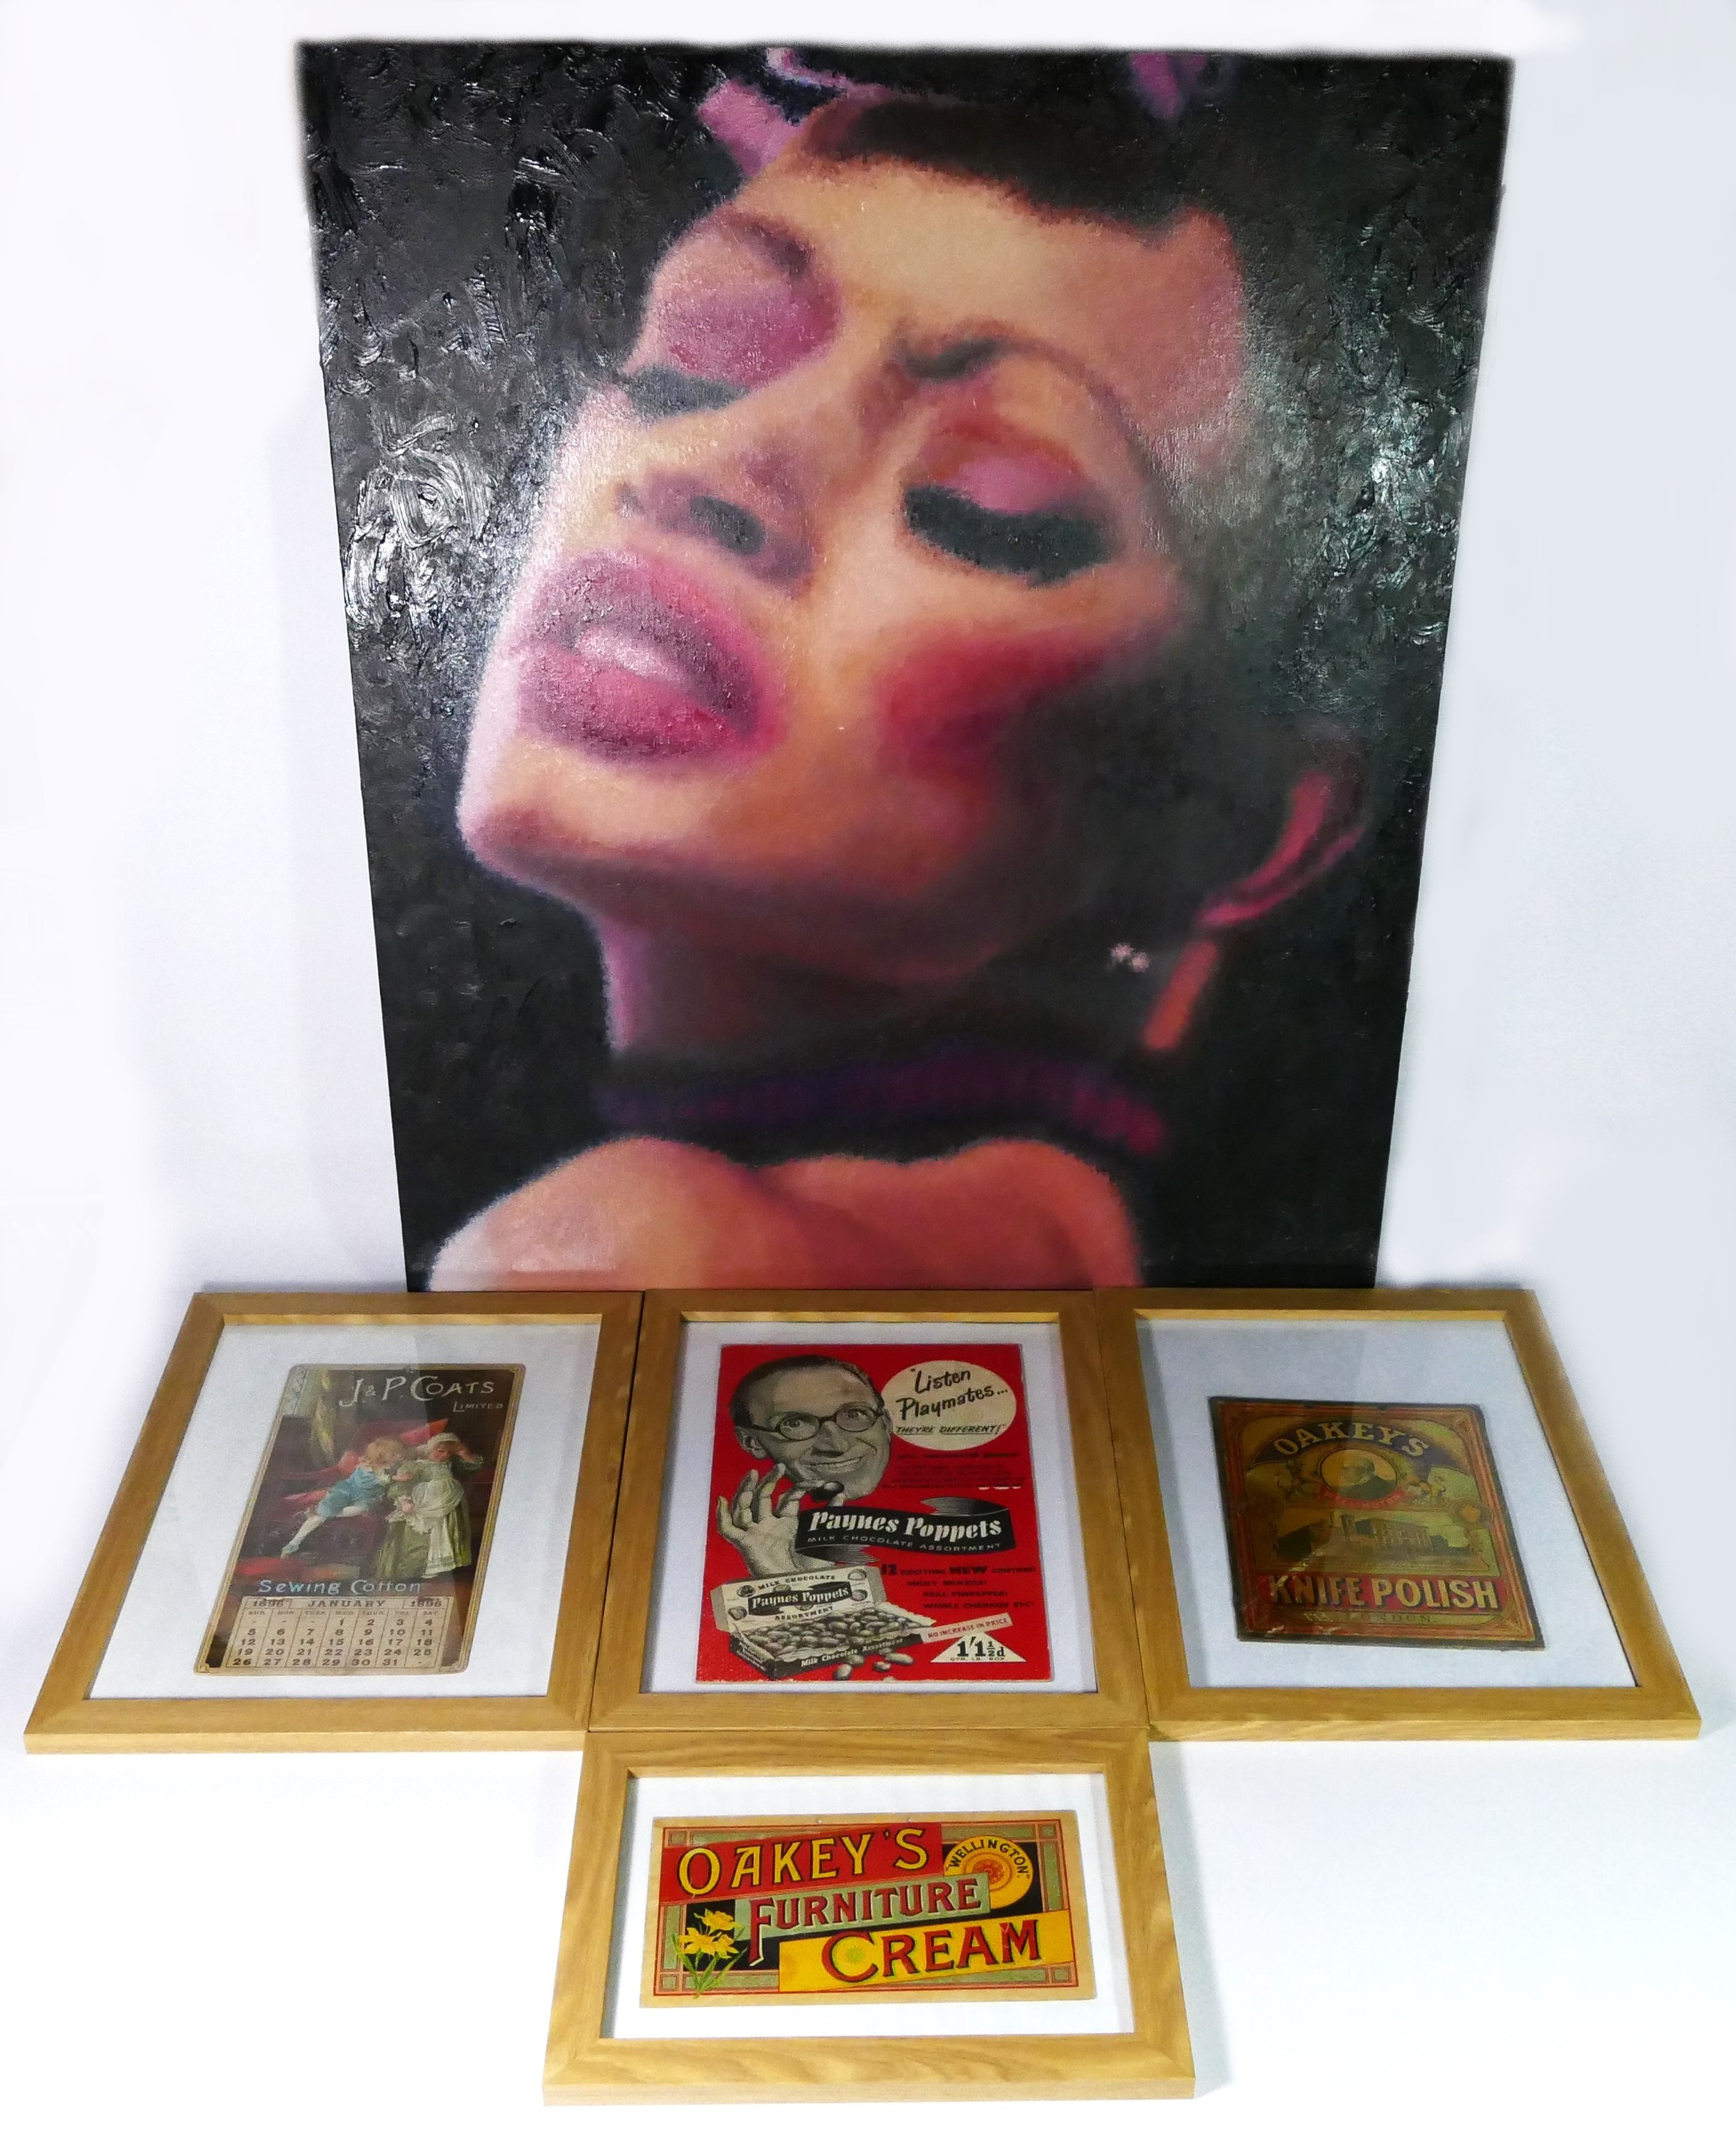 Four framed advertising prints, to include Oakey's Knife Polish, 20cm x 25cm, J & P Coates Sewing